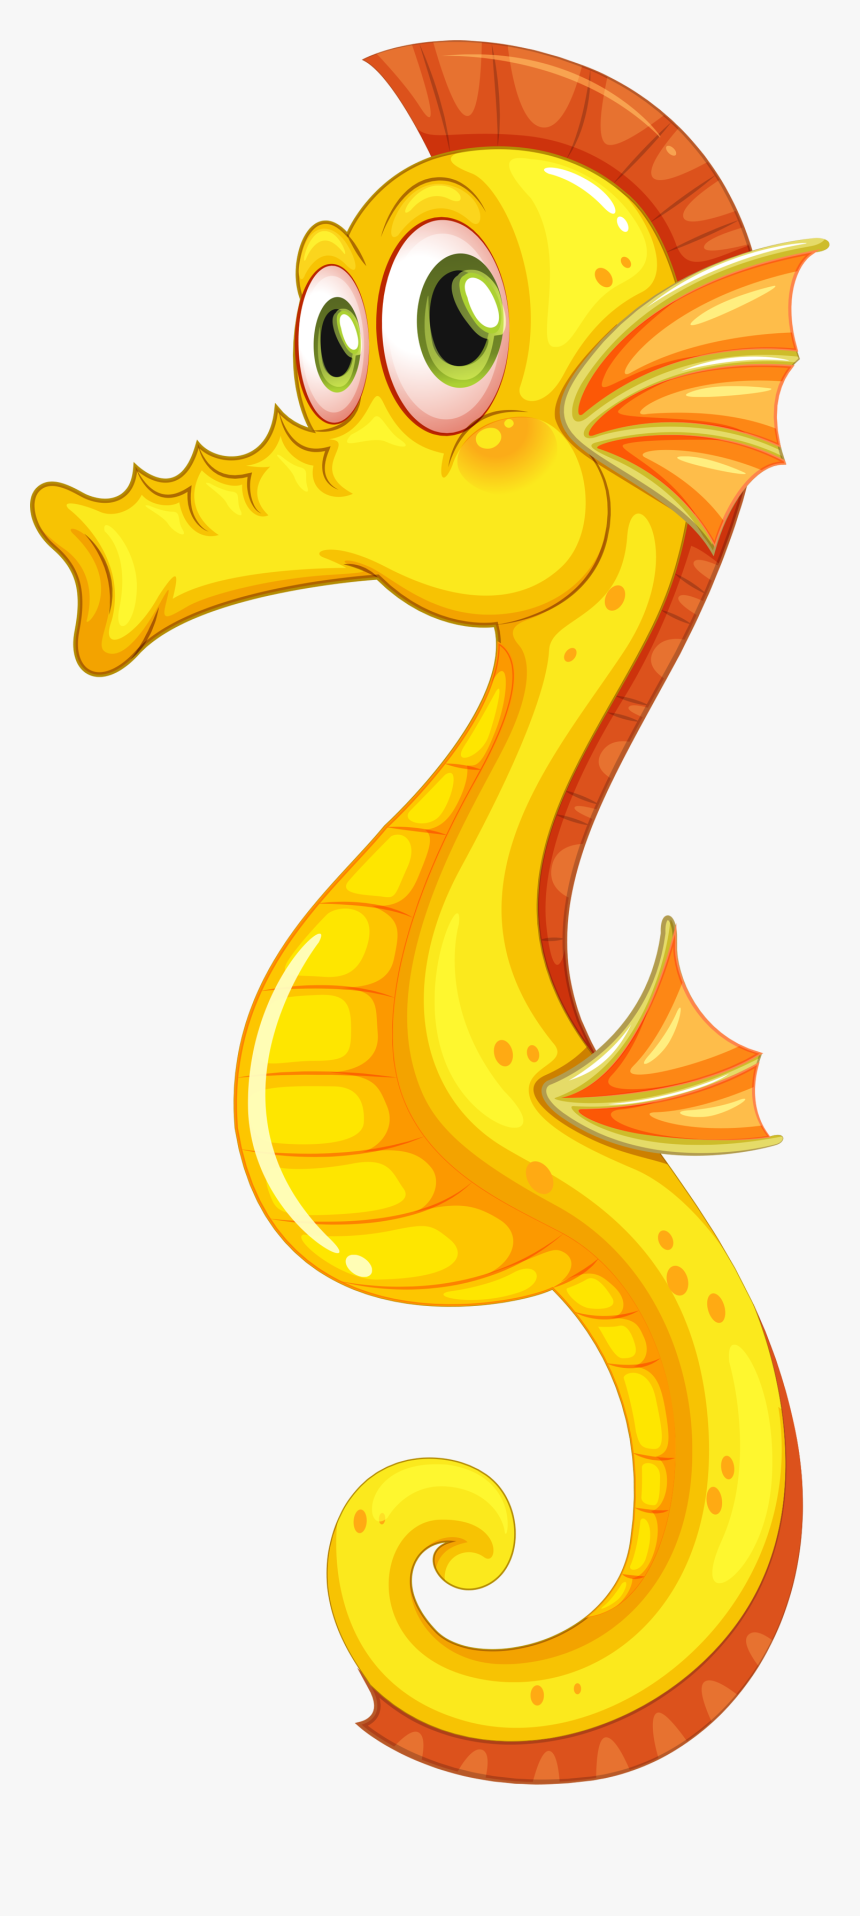 Seahorse Png - Seahorse Cartoon Transparent Background, Png Download, Free Download